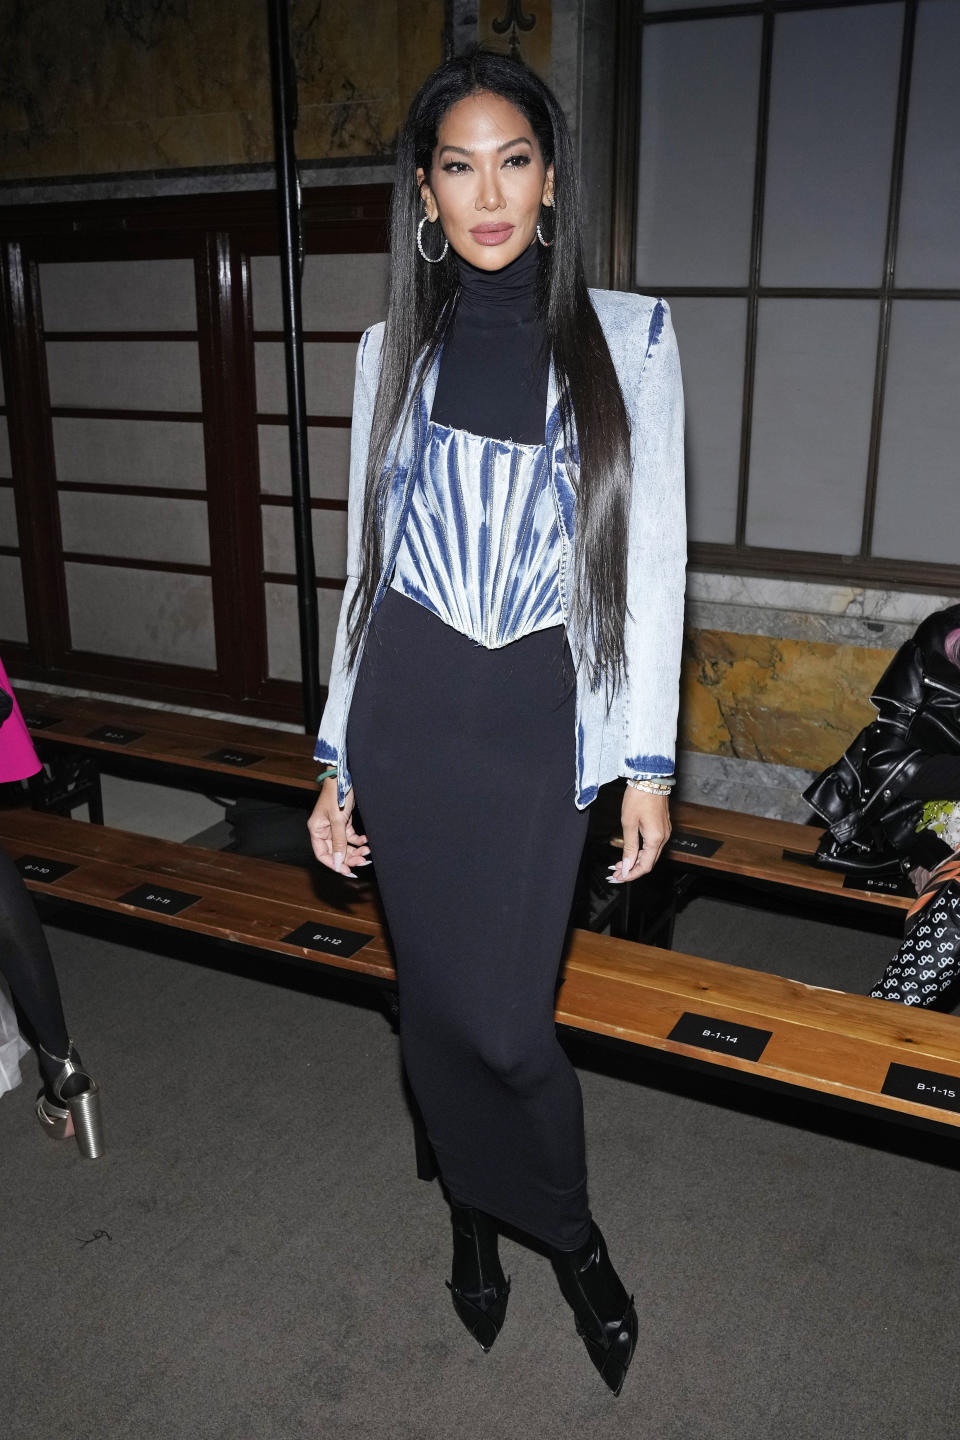 Kimora Lee Simmons attends the Prabal Gurung Fall/Winter 2023 fashion show at Gotham Hall on Friday, Feb. 10, 2023, in New York. (Photo by Charles Sykes/Invision/AP)